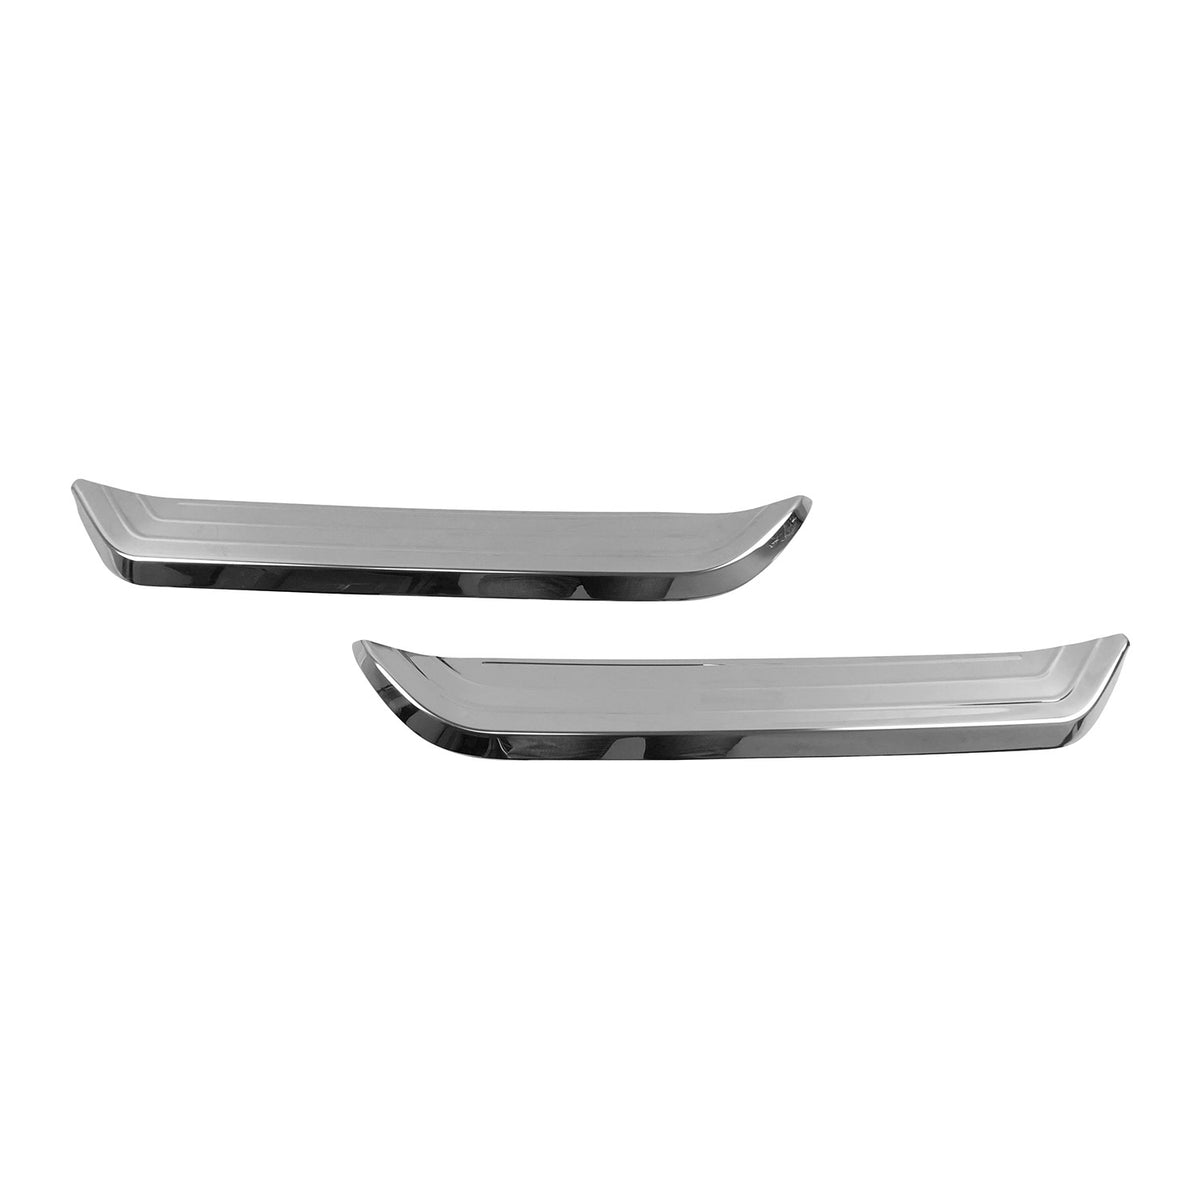 Rear diffuser bumpers for Nissan Qashqai J11 2017-2021 stainless steel silver 2x